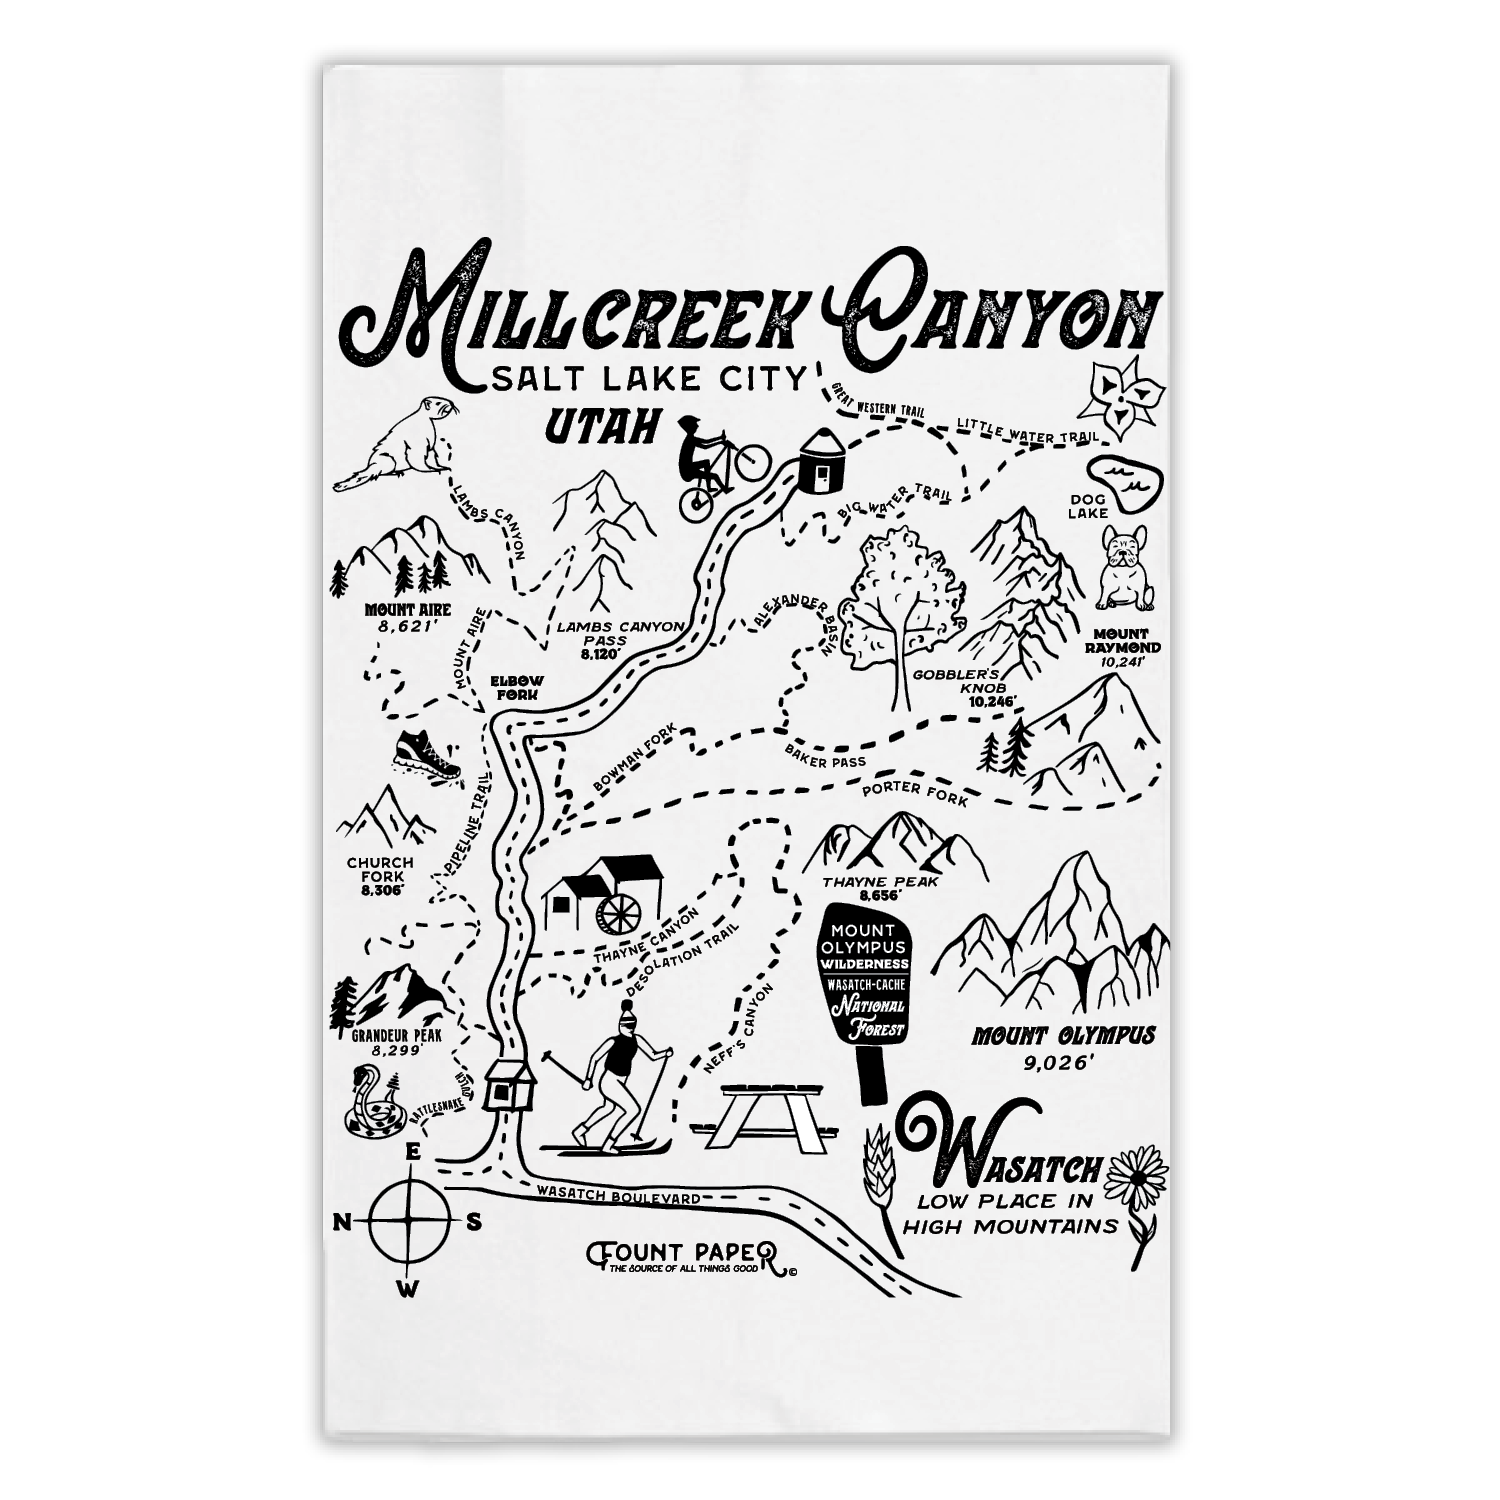 Hand drawn map of Millcreek canyon featuring printed on a tea towel